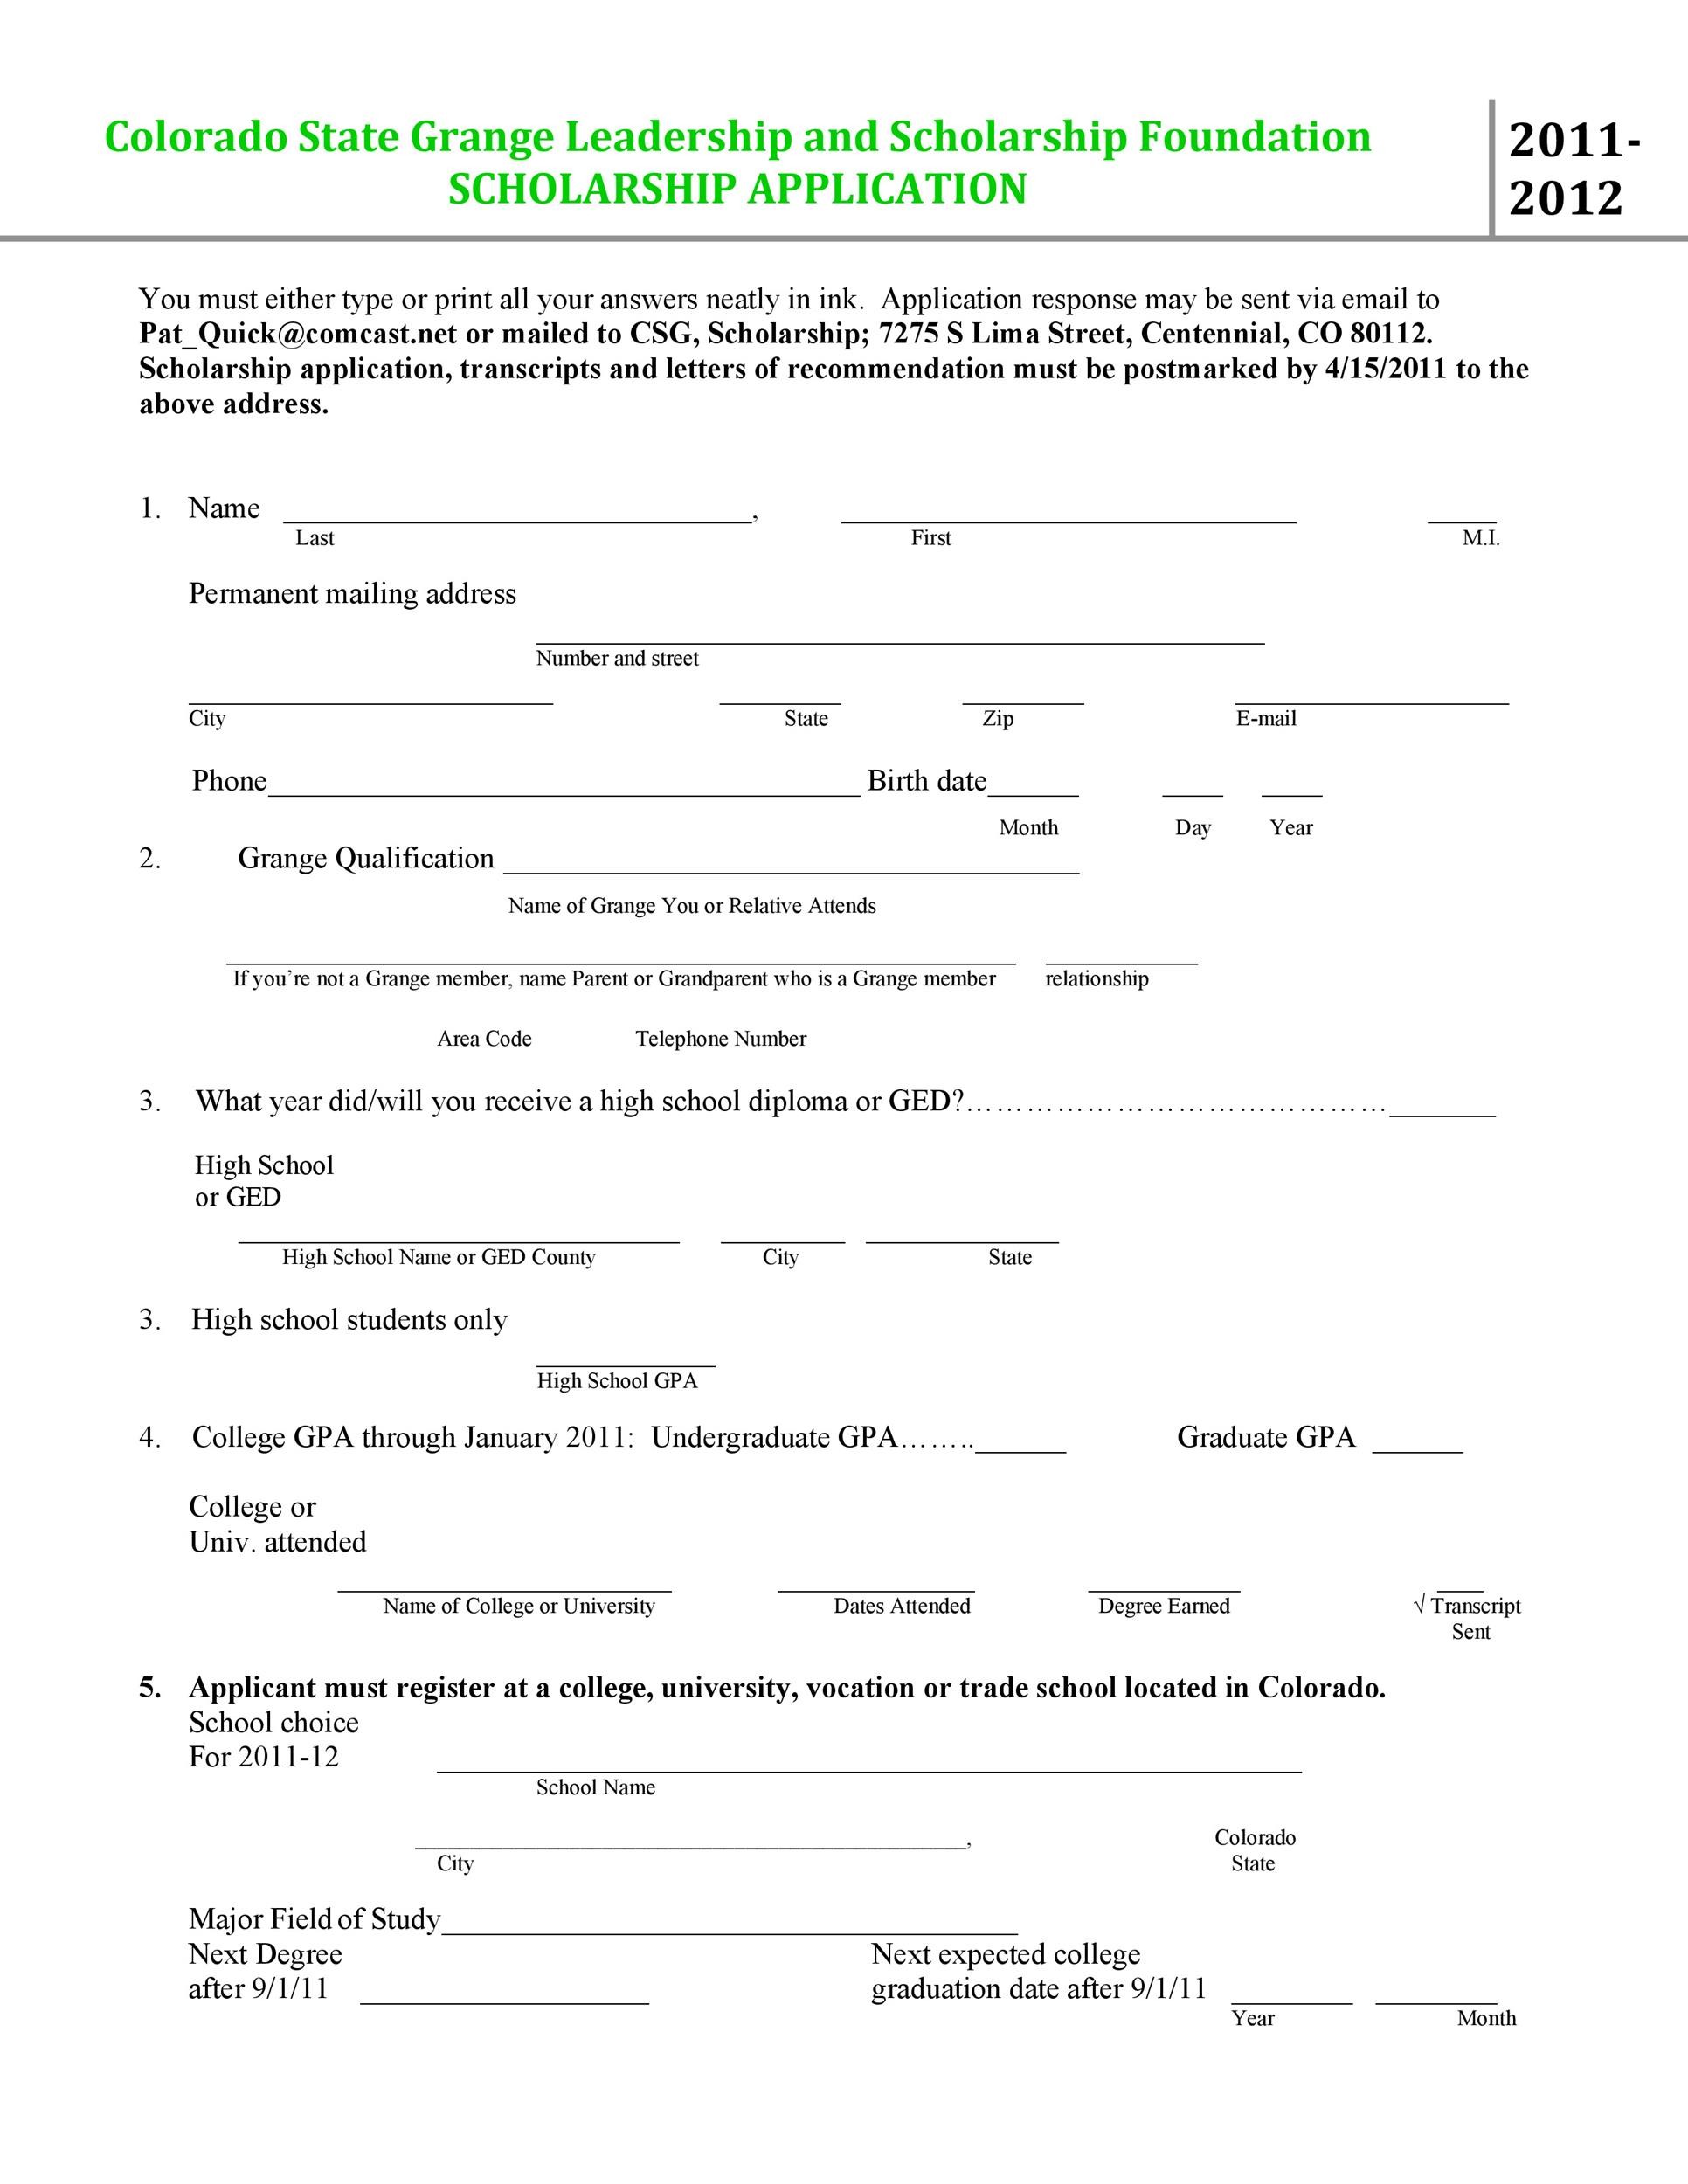 50 Free Scholarship Application Templates Forms TemplateLab